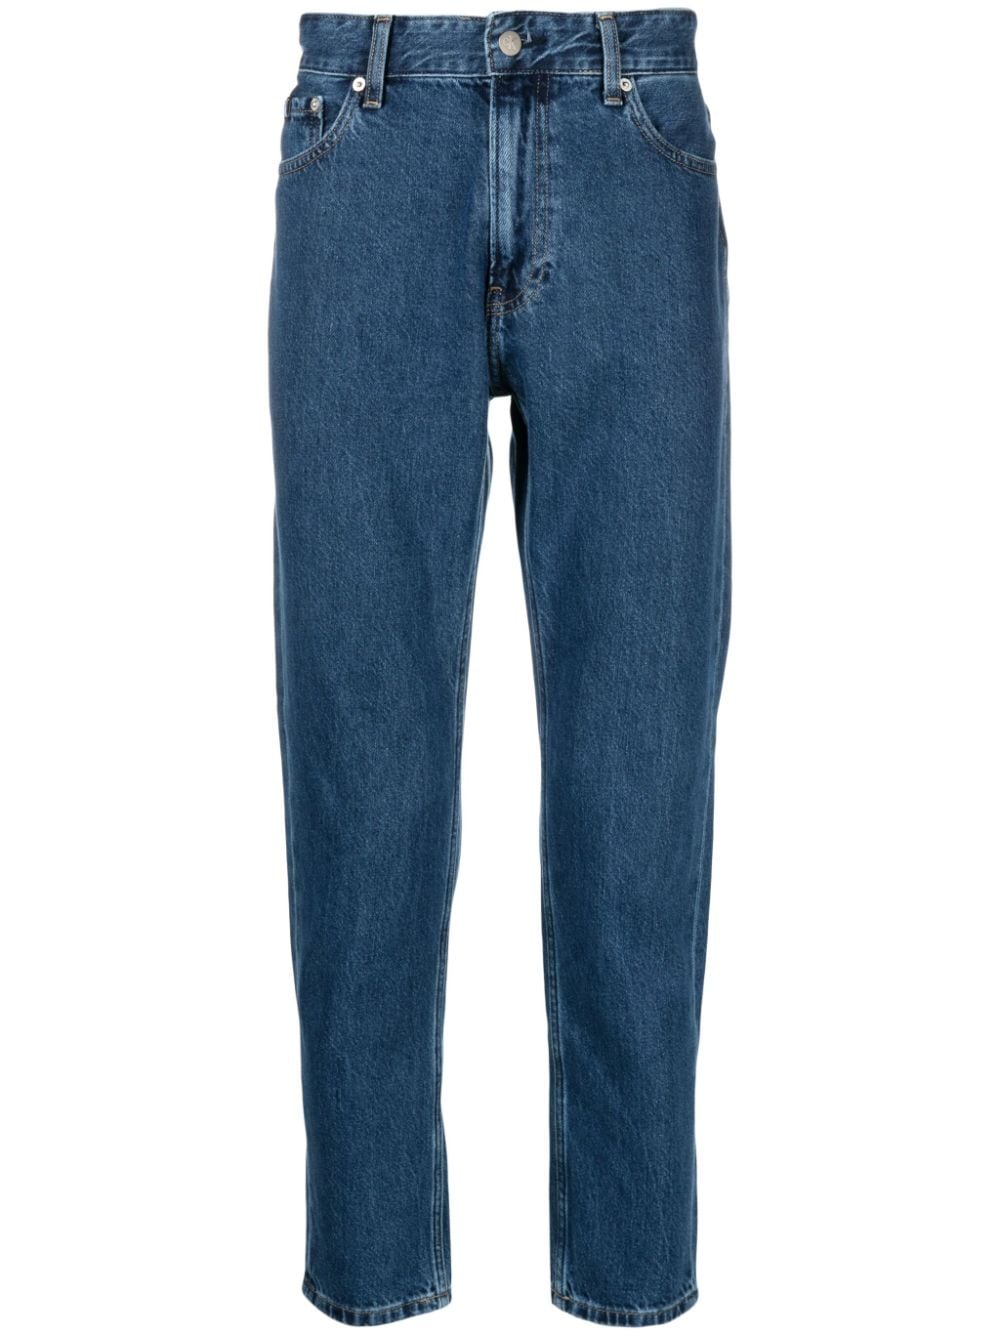 CALVIN KLEIN JEANS EST.1978 TAPERED-LEG CROPPED JEANS